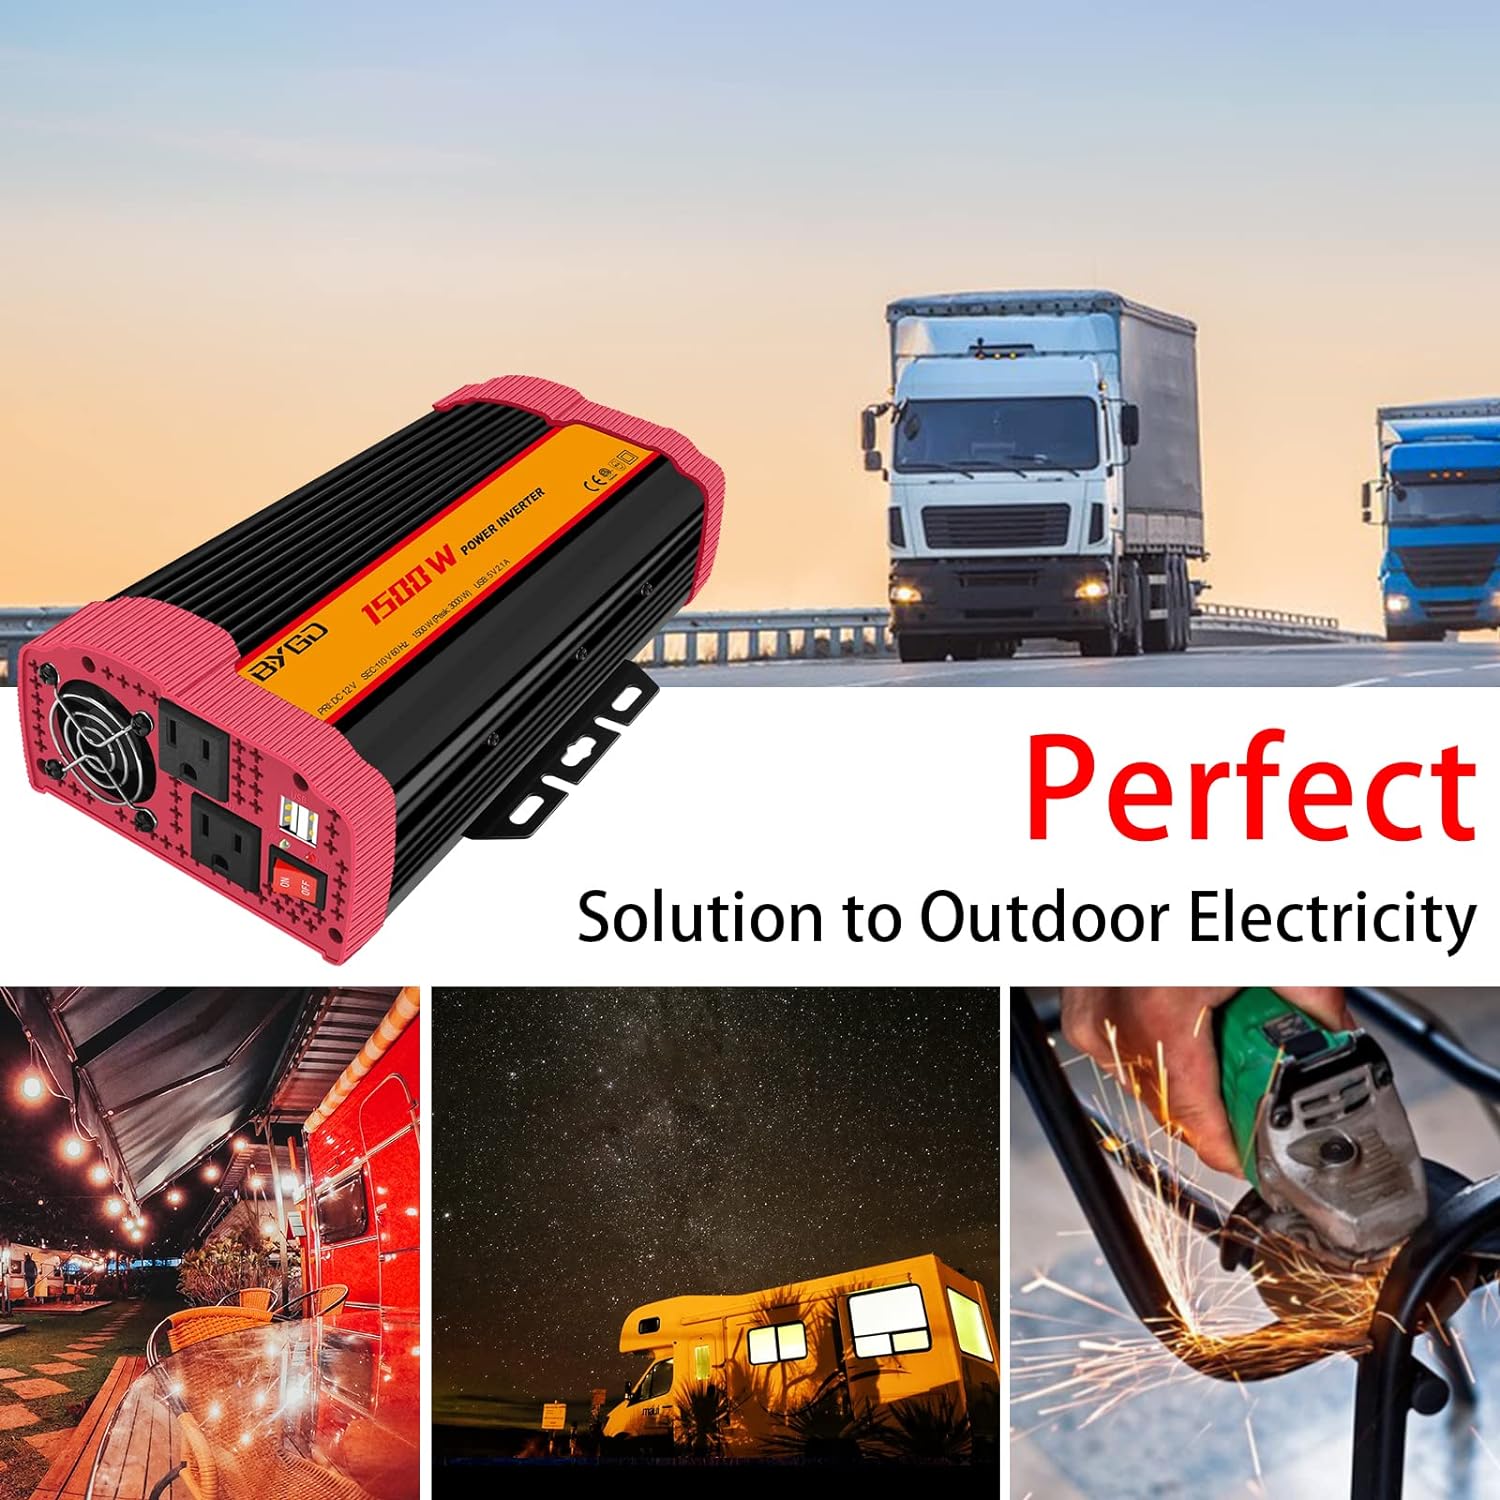 1500 Watt/3000 Watt Inverter 12V to 110V Power Inverter with Dual Outlets & Dual 2.1A USB Ports DC to AC Inverter for Outdoorhome, Camping, Rv, Truck